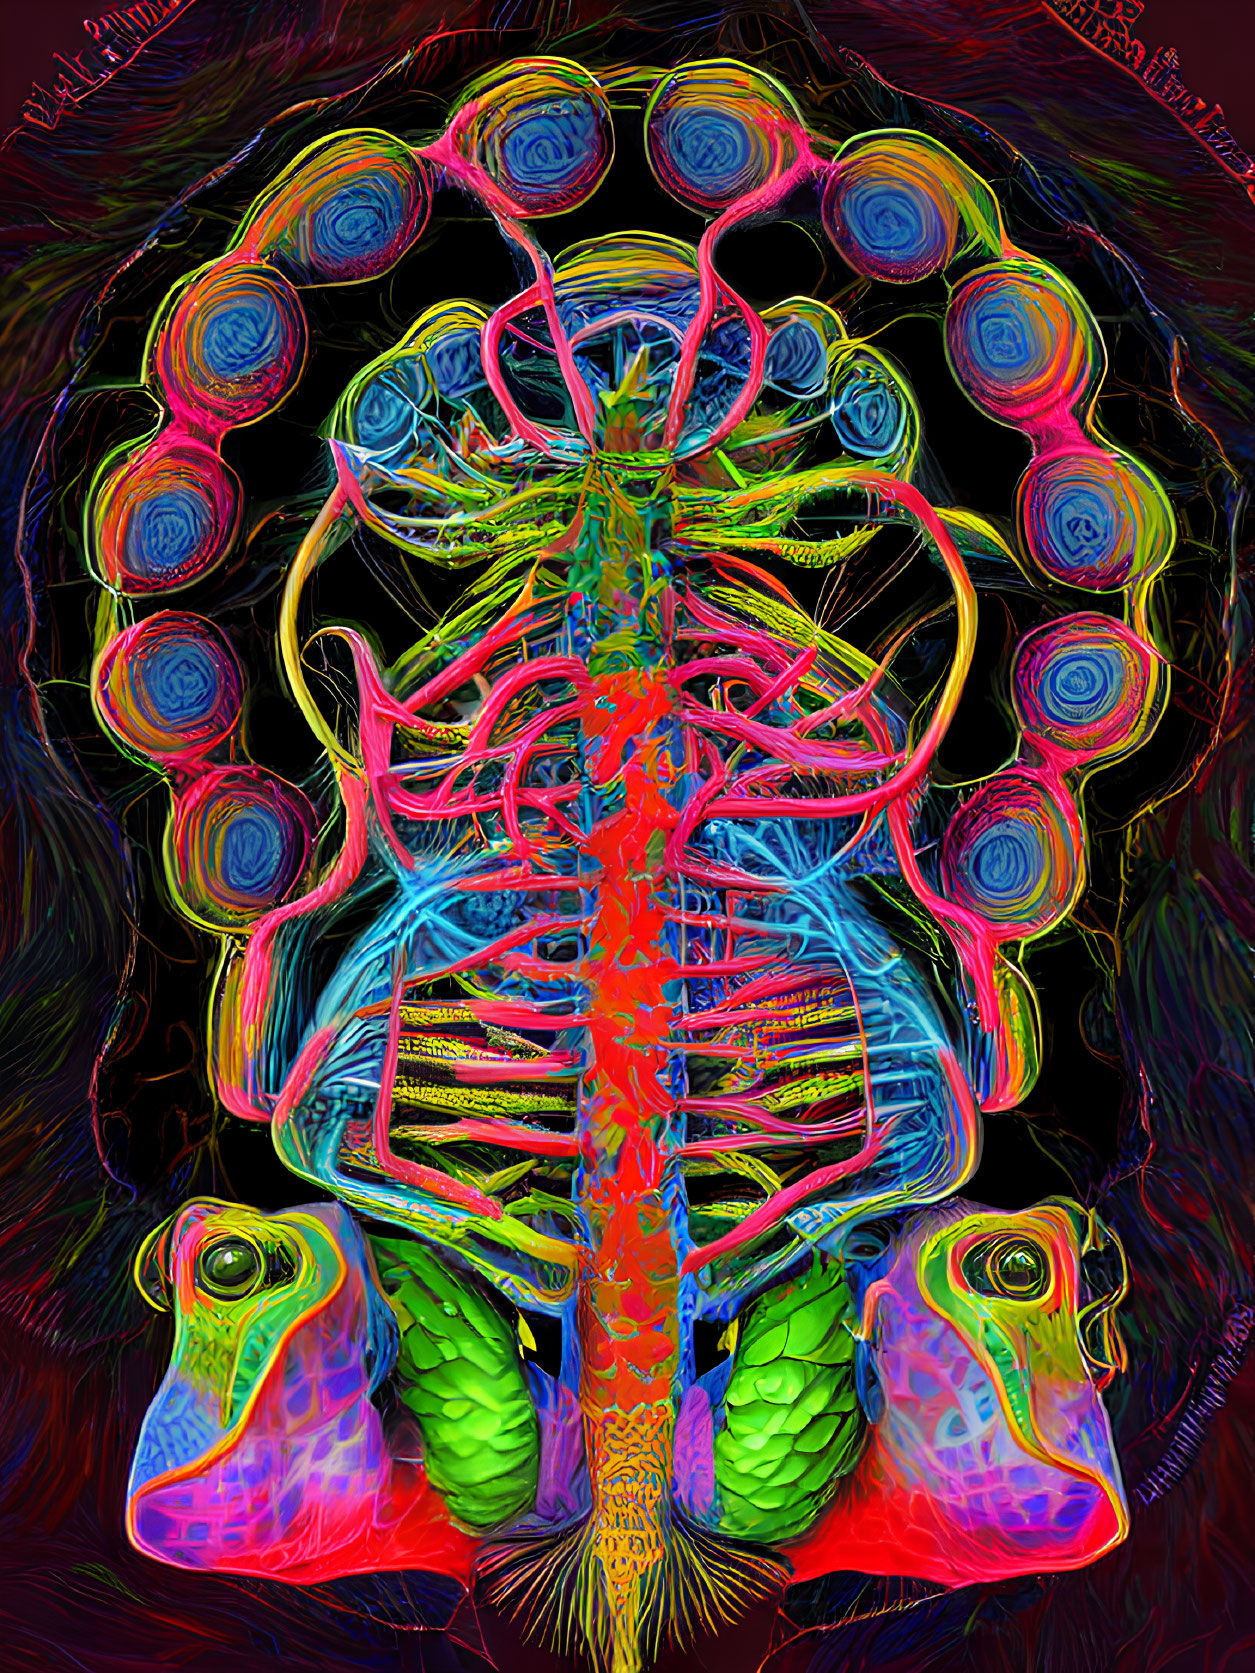 Vibrant Artistic Representation of Cardiovascular and Respiratory Systems